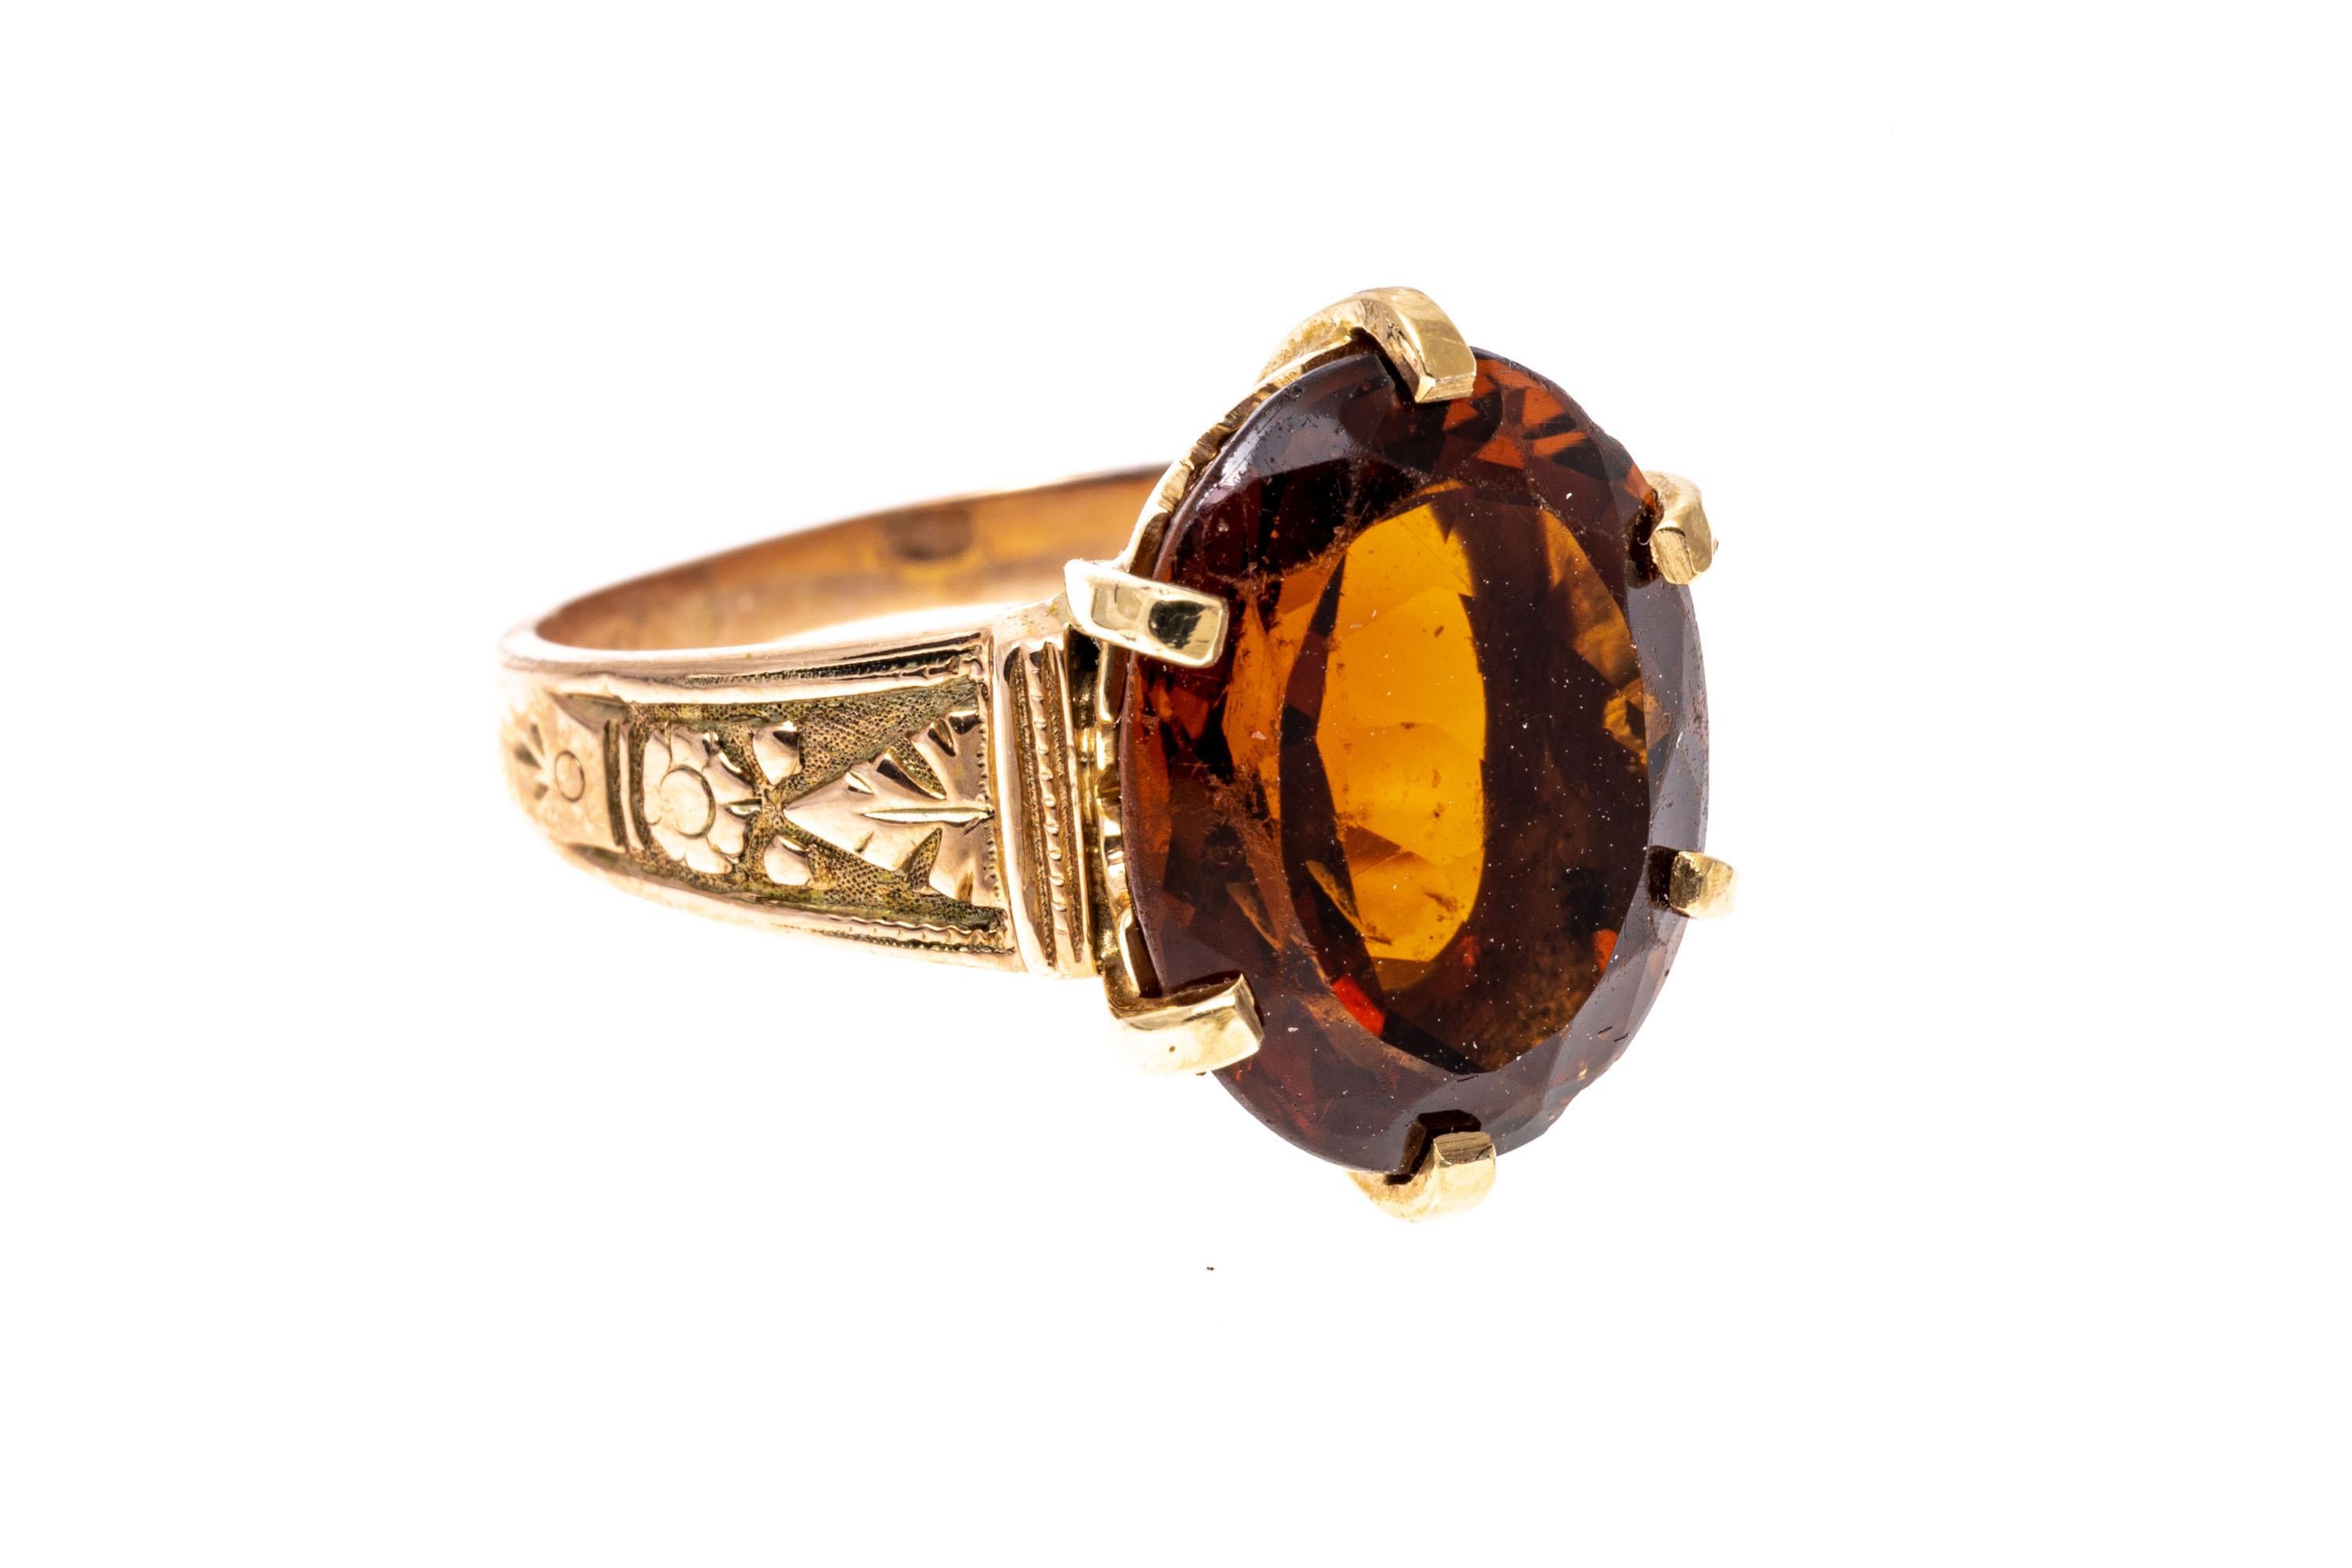 10k yellow gold ring. This pretty vintage ring features a center oval faceted, dark orange color citrine, approximately 4.93 CTS, accented by flower and foliate decorated shoulders.
Marks: None, tests 10k
Dimensions: 3/8